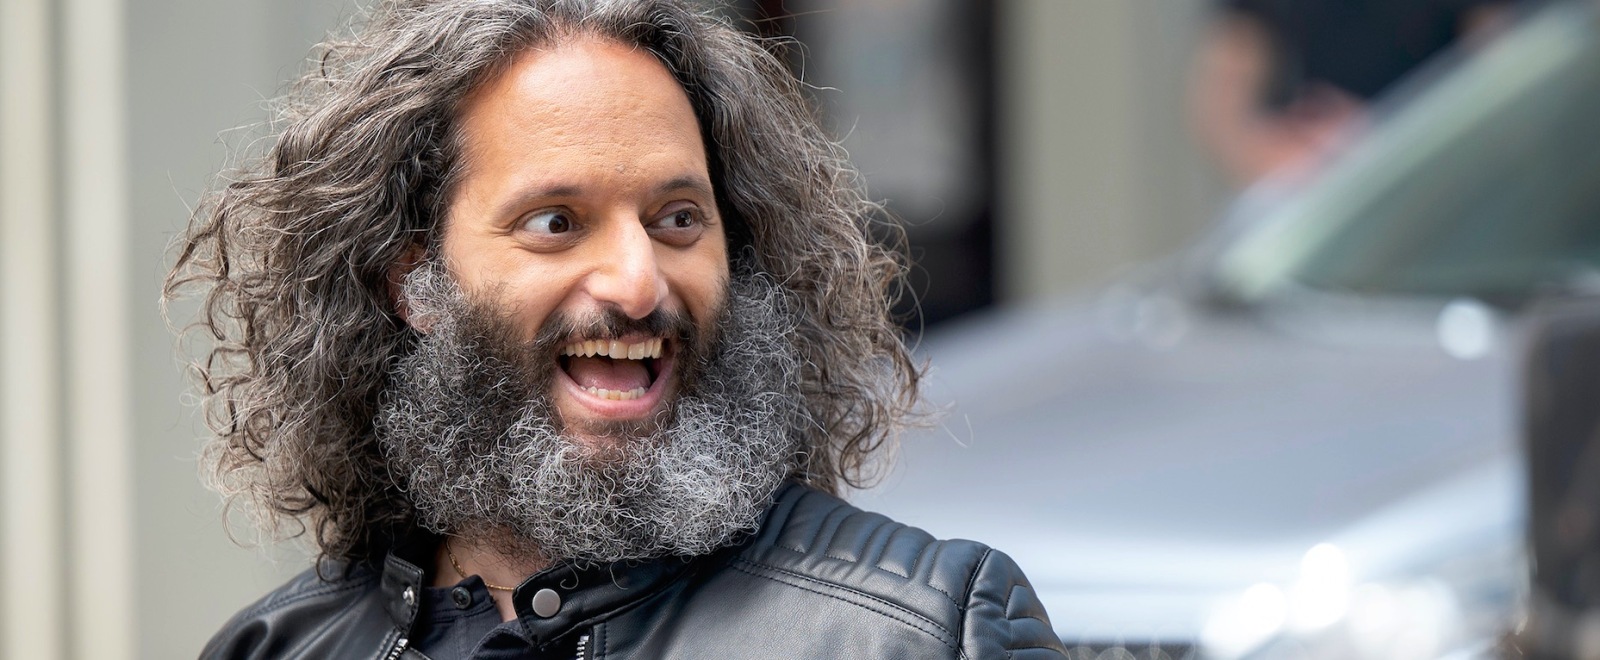 Your Wish Came True, Jason Mantzoukas Will Voice Tommy Lee’s Penis In Hulu’s ‘Pam & Tommy’